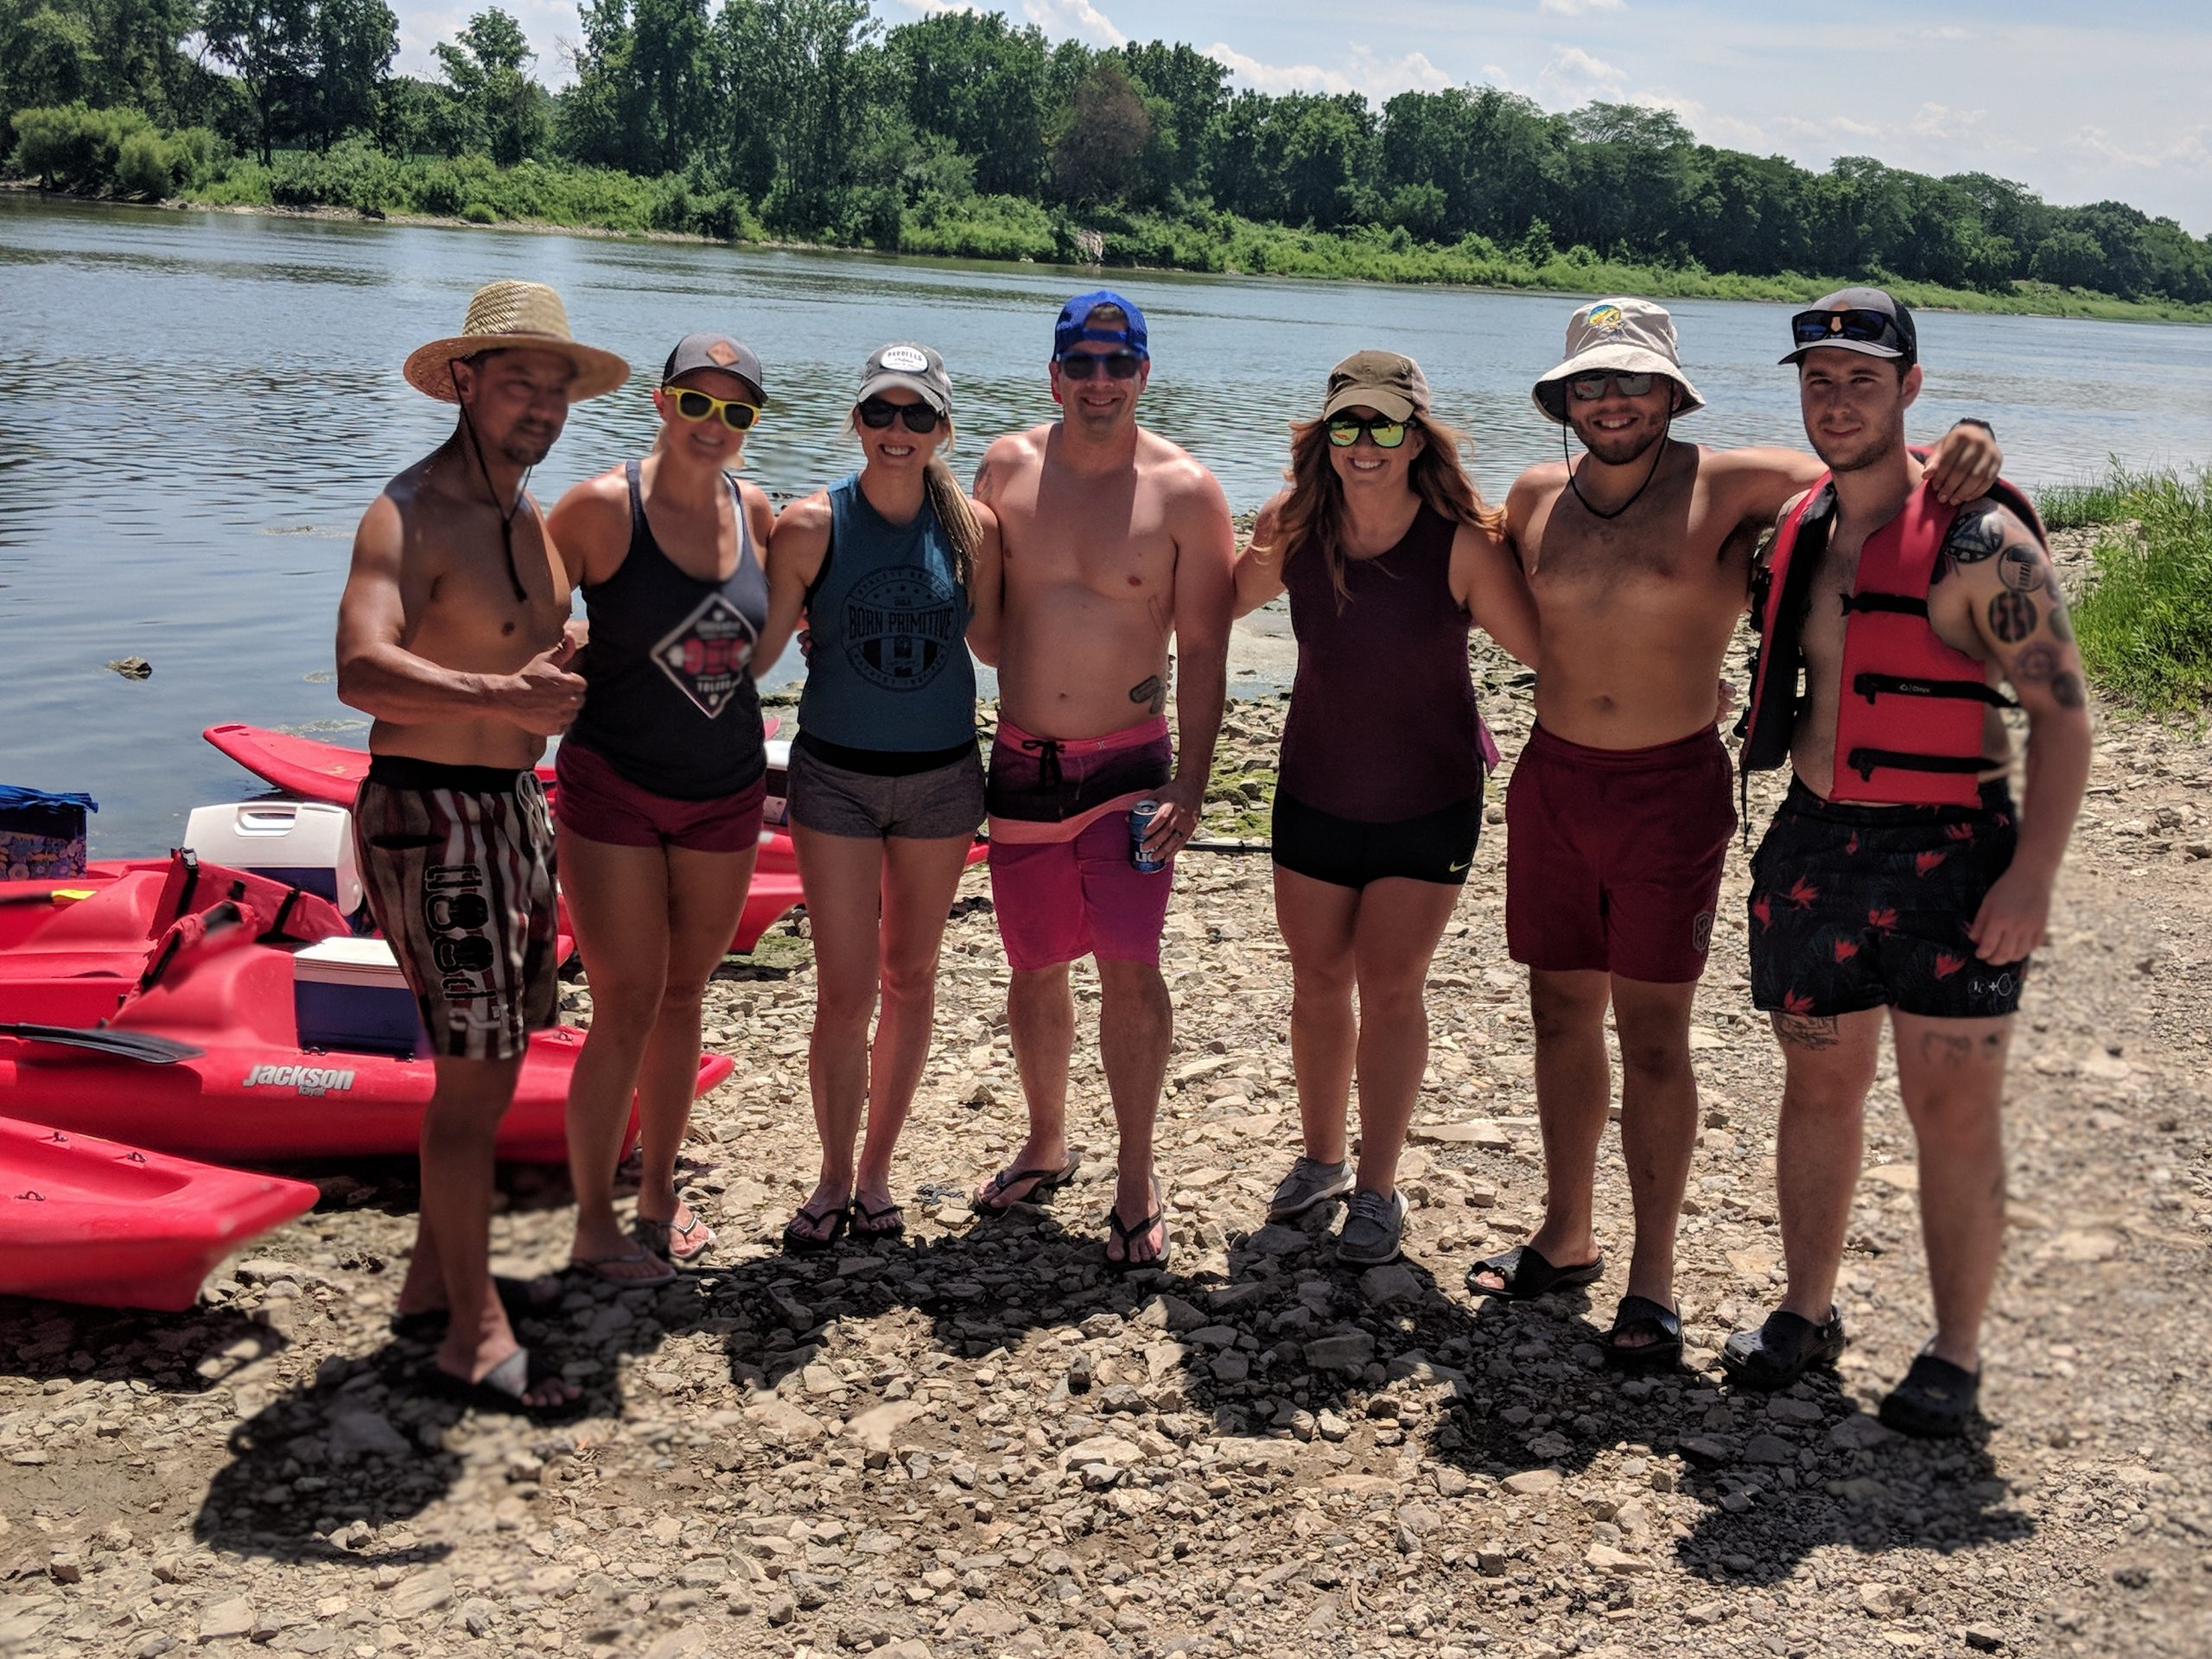 Maumee river report- 10 July 2020